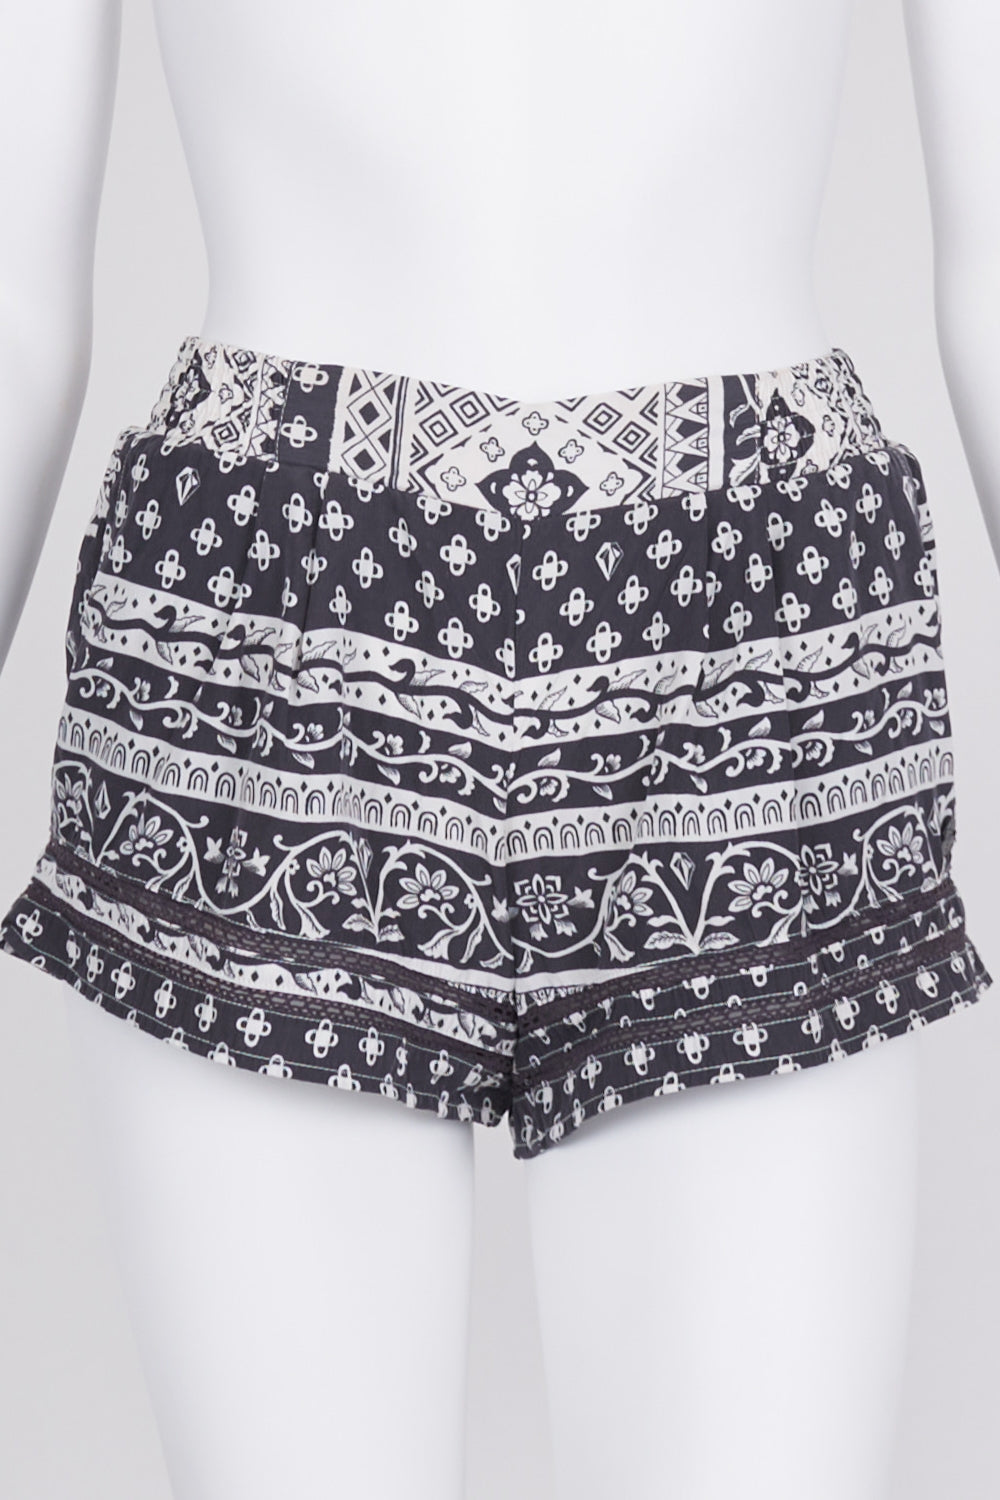 Volcom Grey And White Patterned Shorts 8